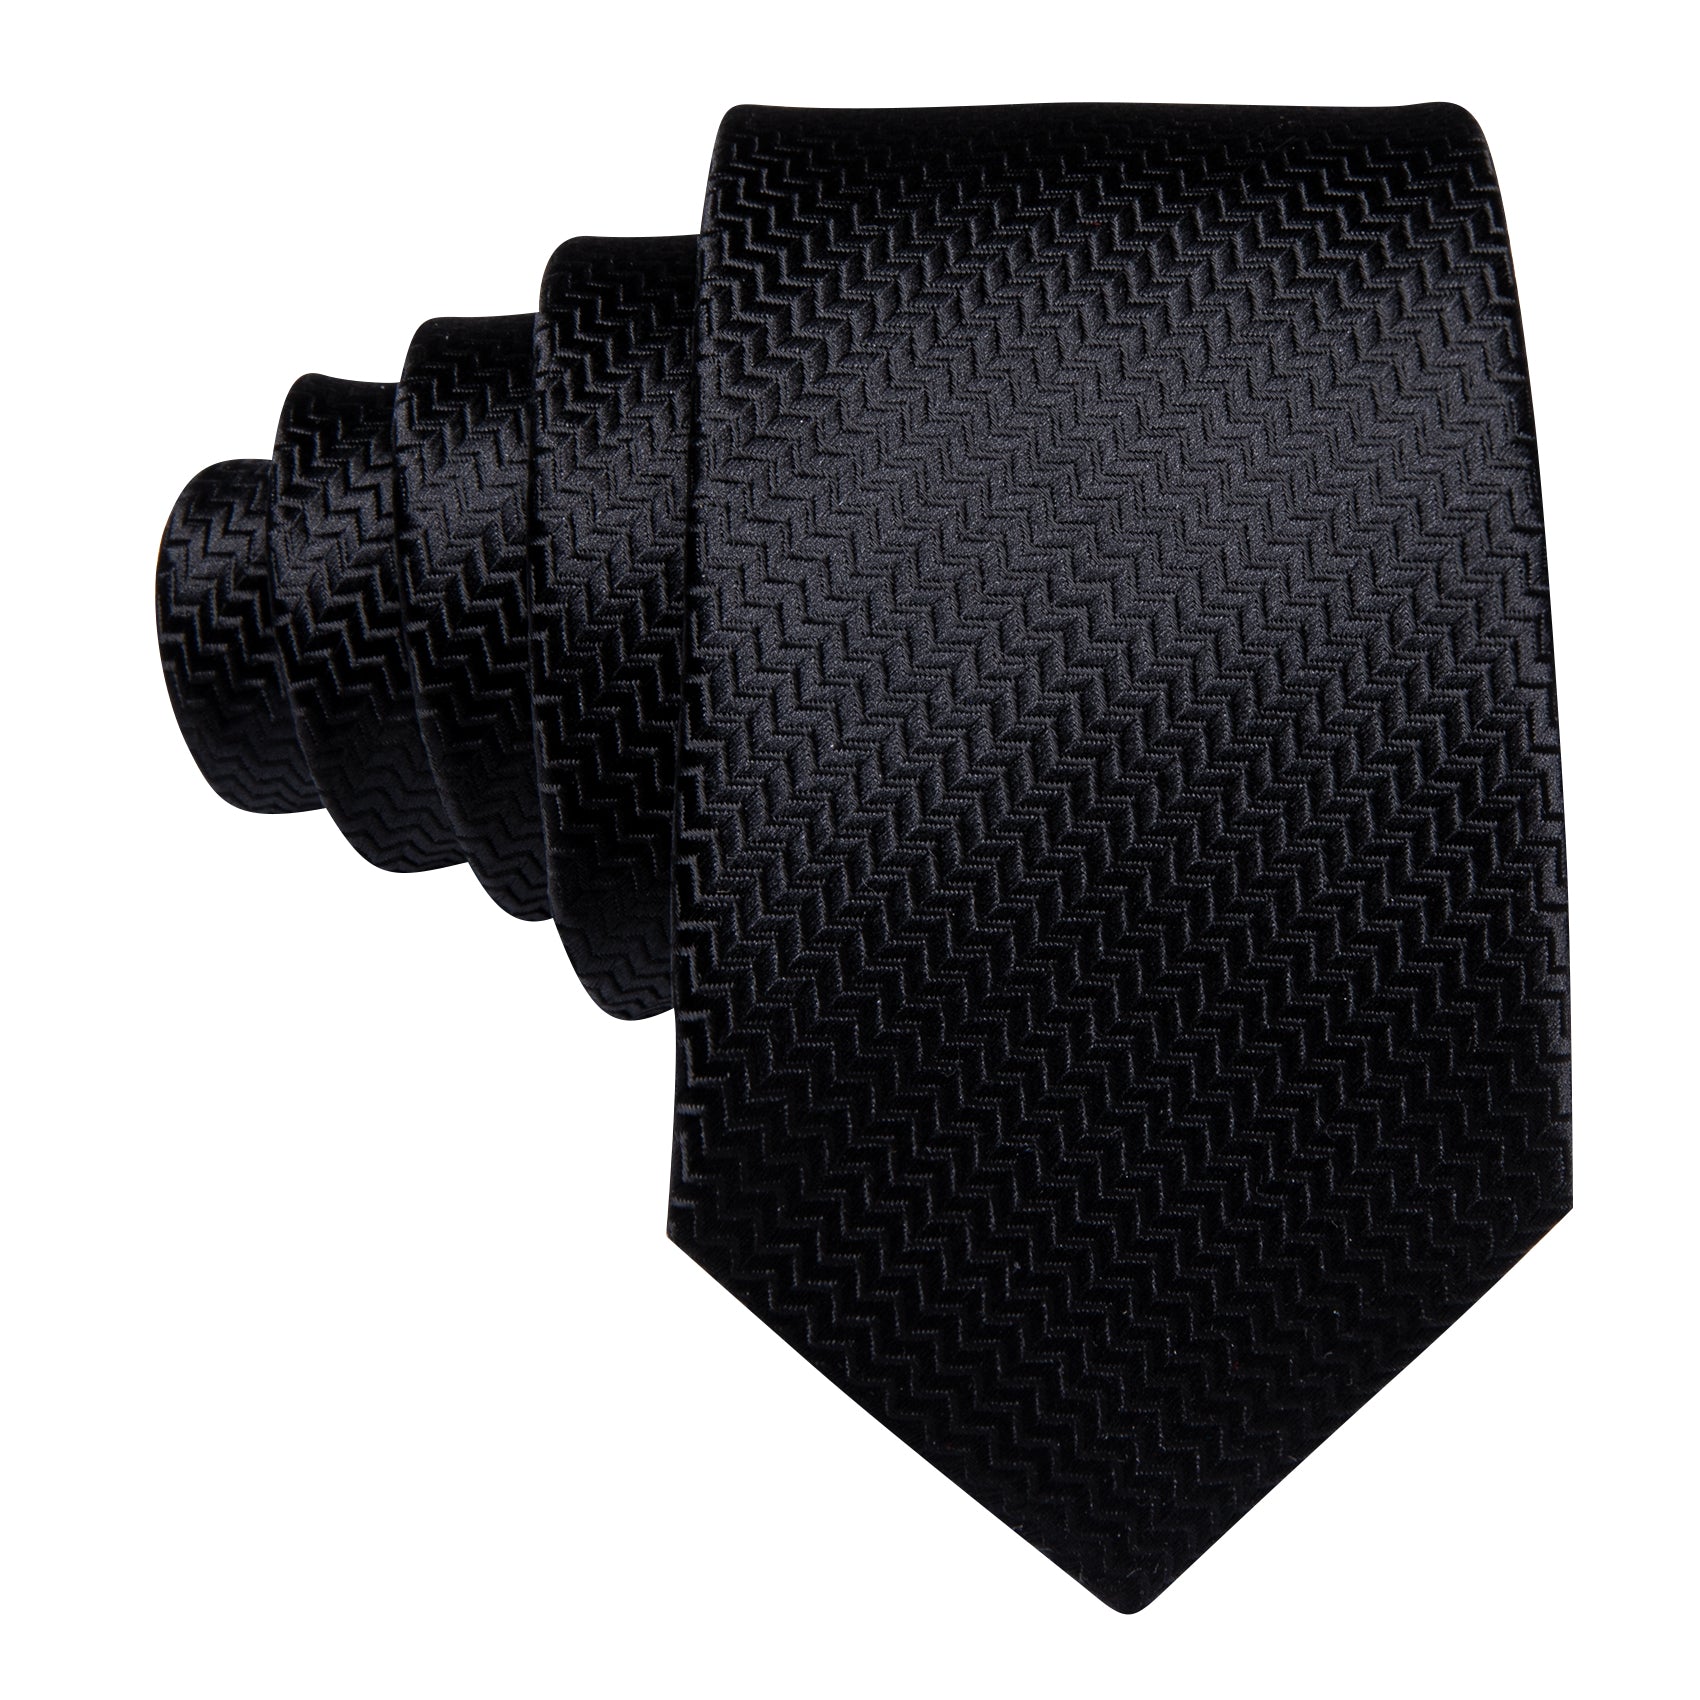 Barry.wang Extra Long Tie Black Solid Silk 63 Inches Men's Tie Pocket Square Cufflinks Set